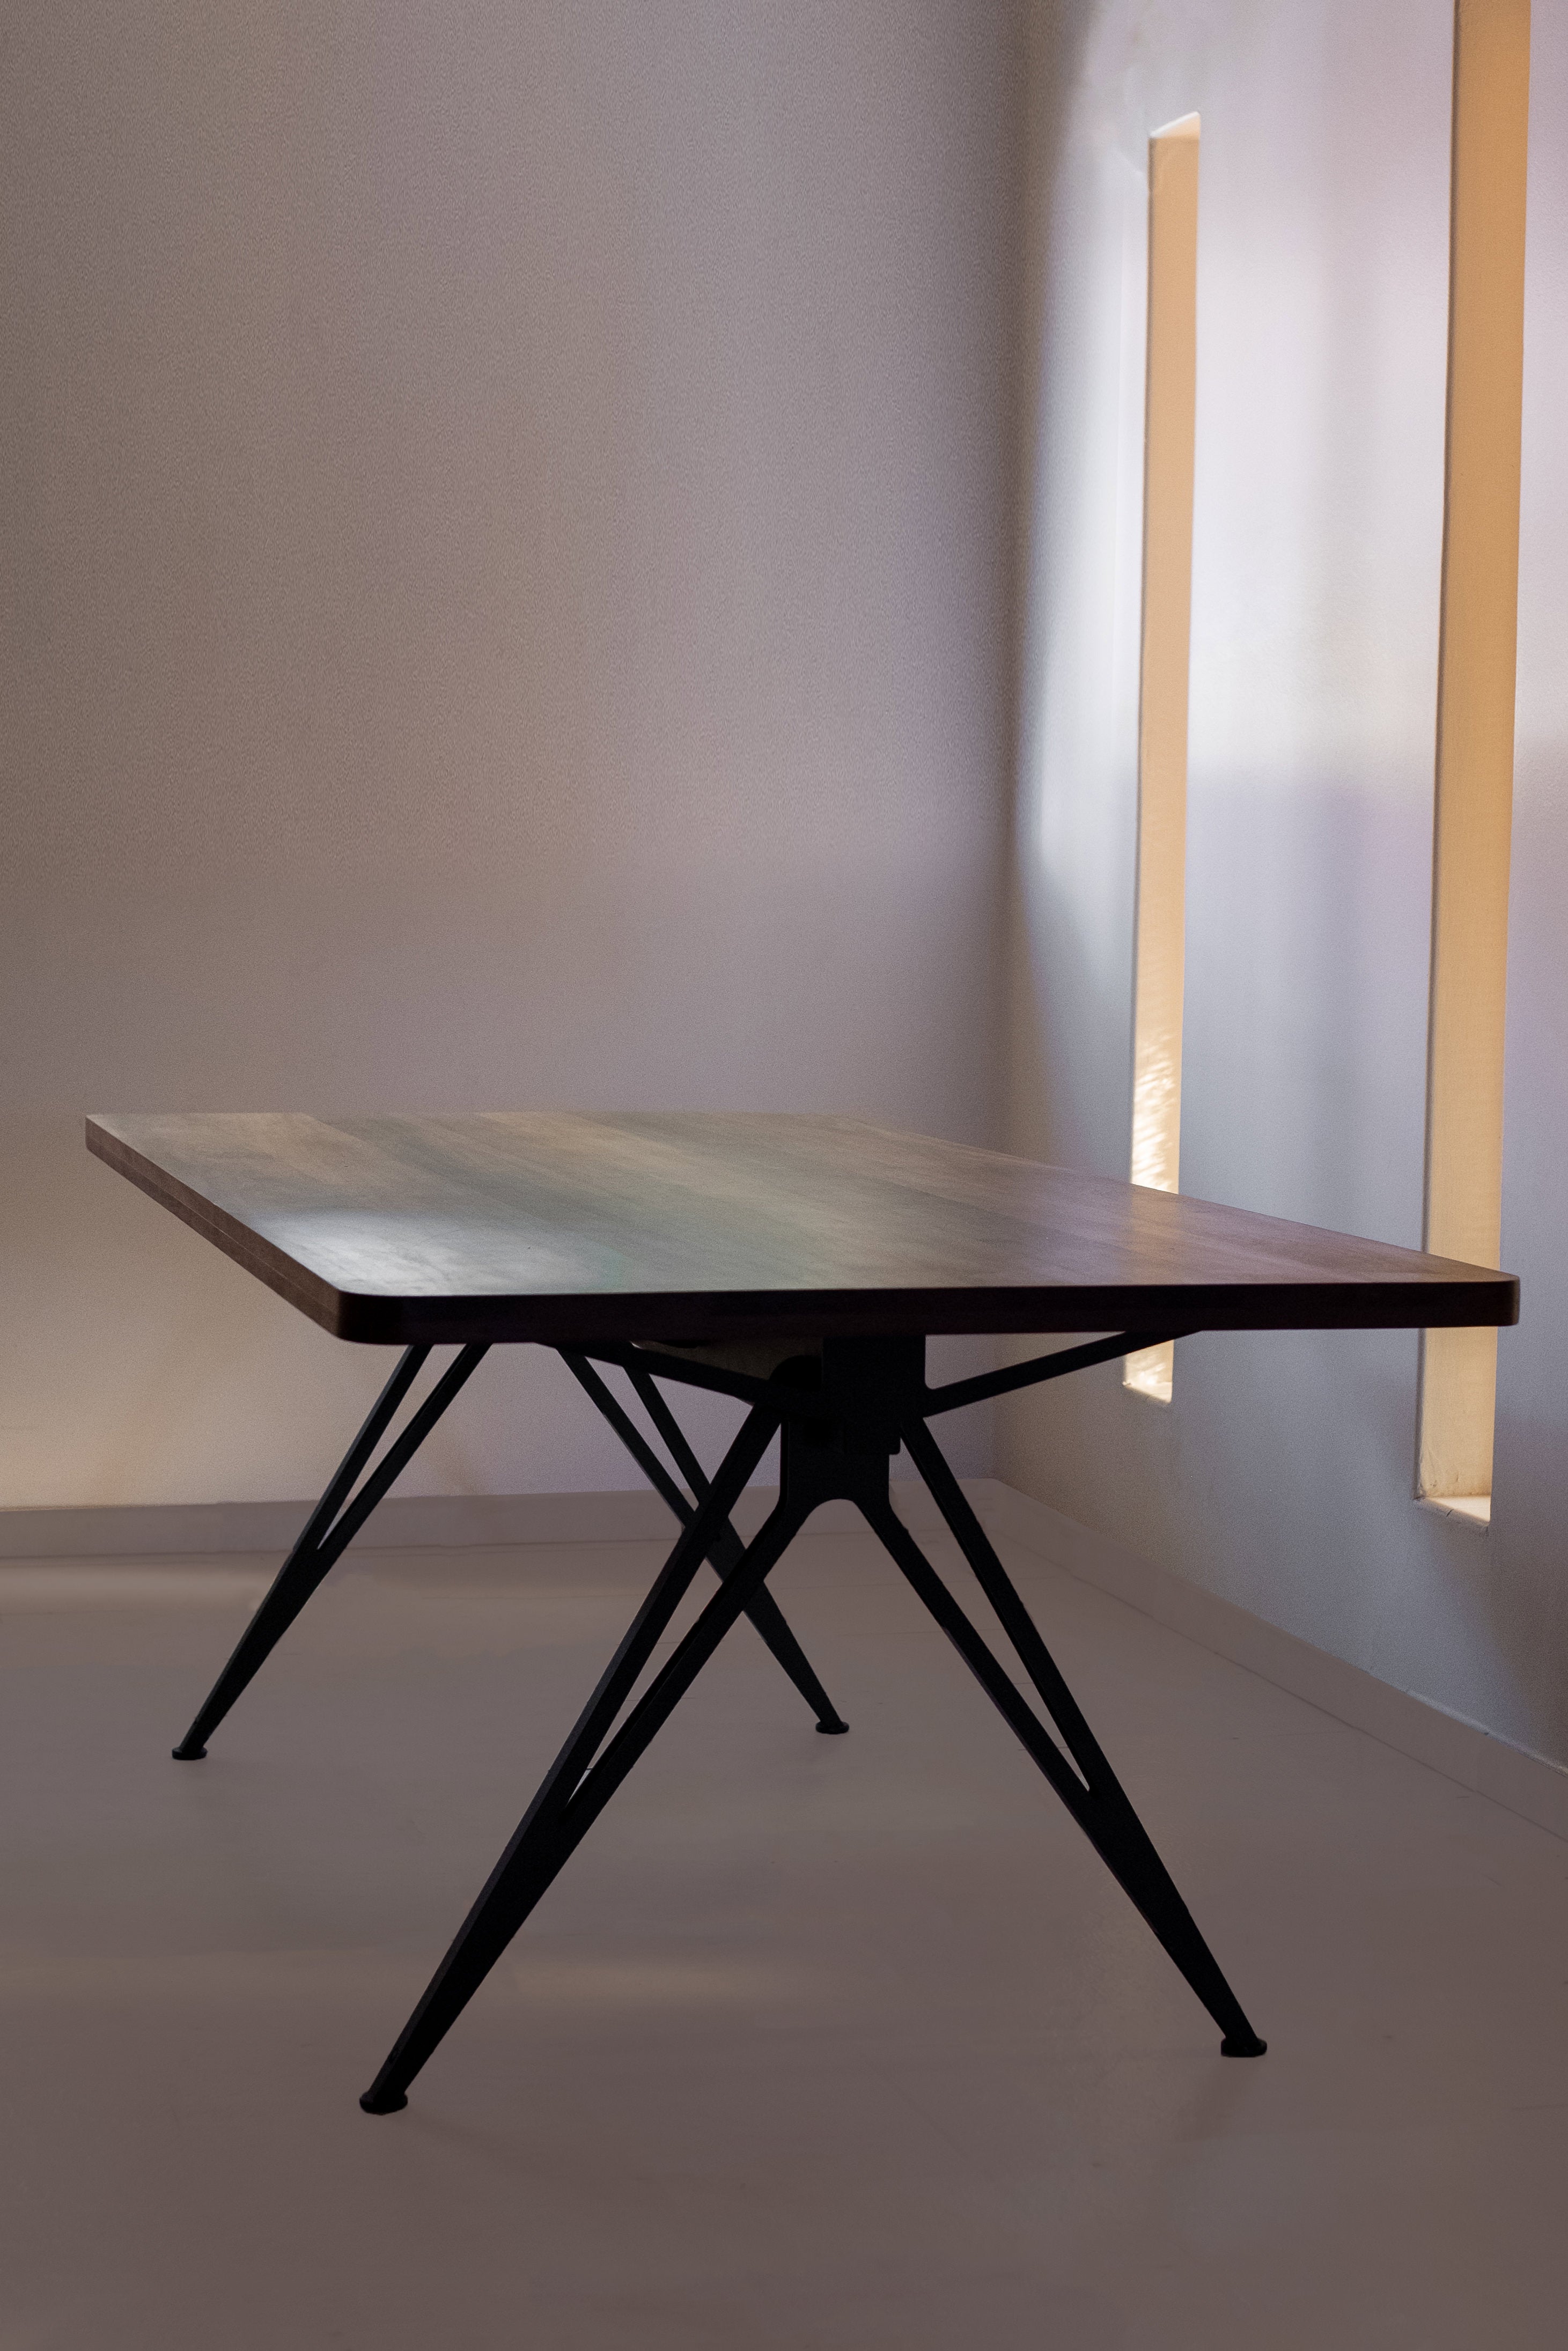 Designed with endless lengths in mind. The Spine table consists of a modular base, combining steel legs and braces on a central support beam. This simple system can be multiplied to any length, and is made from a selection of high quality materials